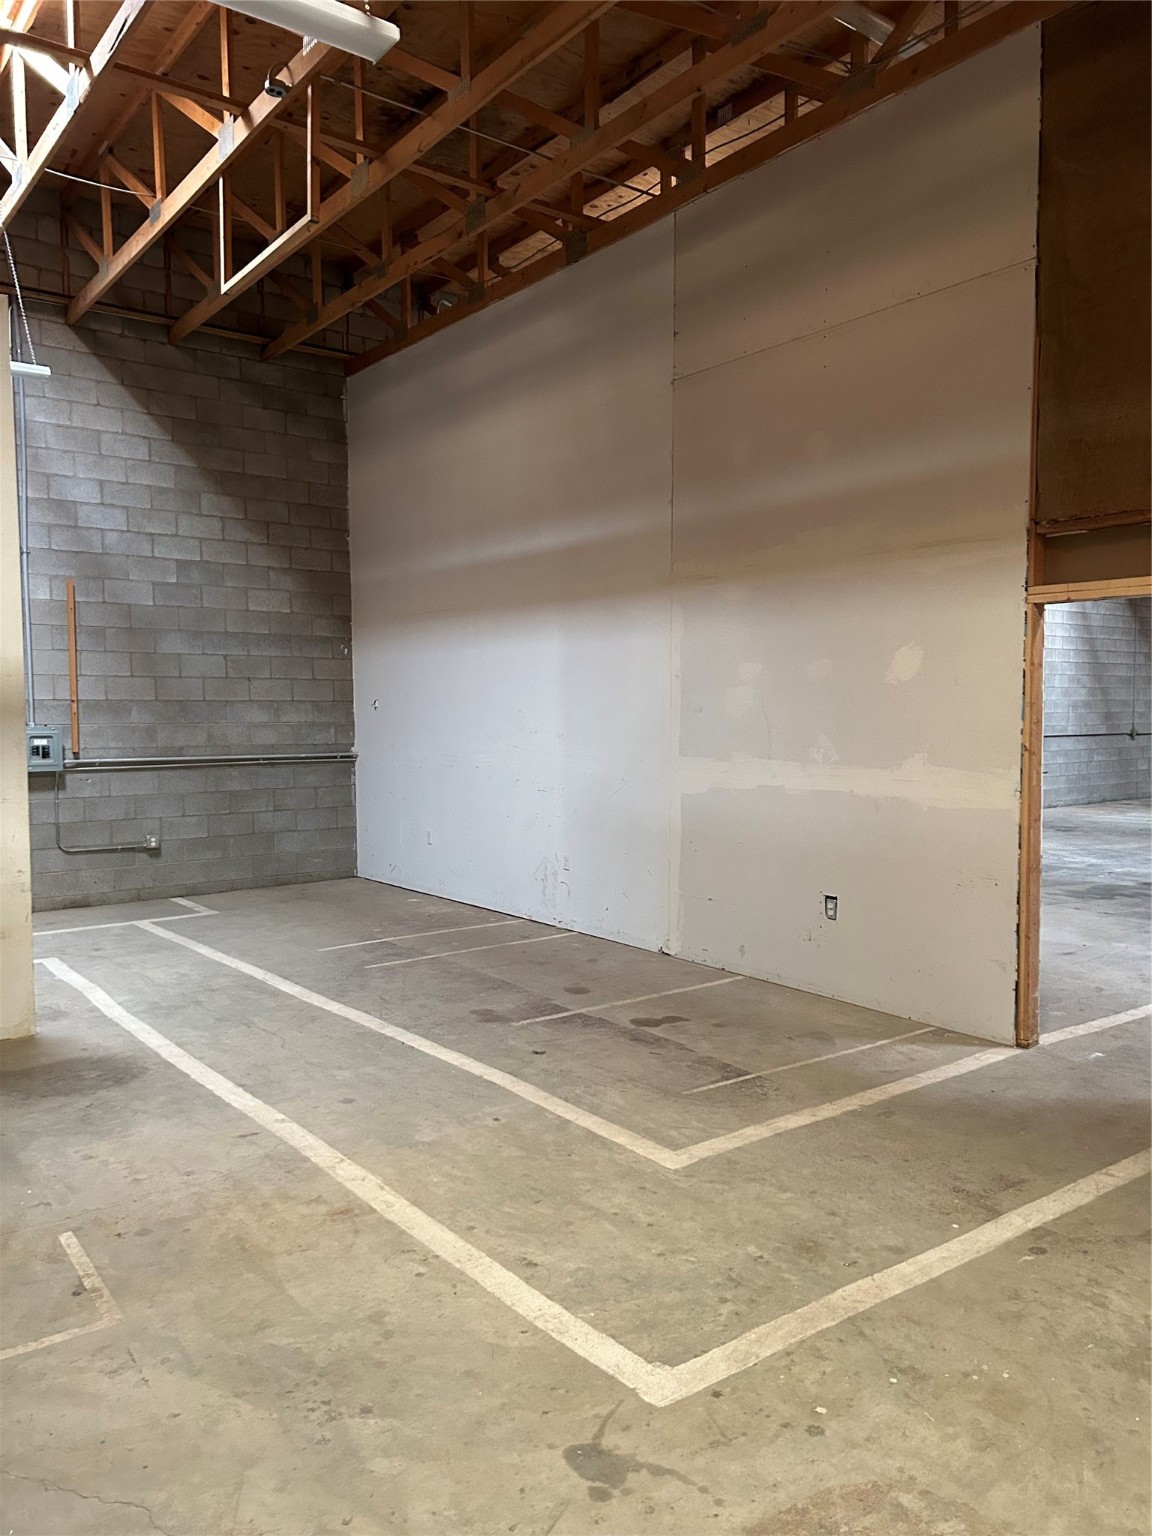 Partition wall in warehouse (not load bearing).